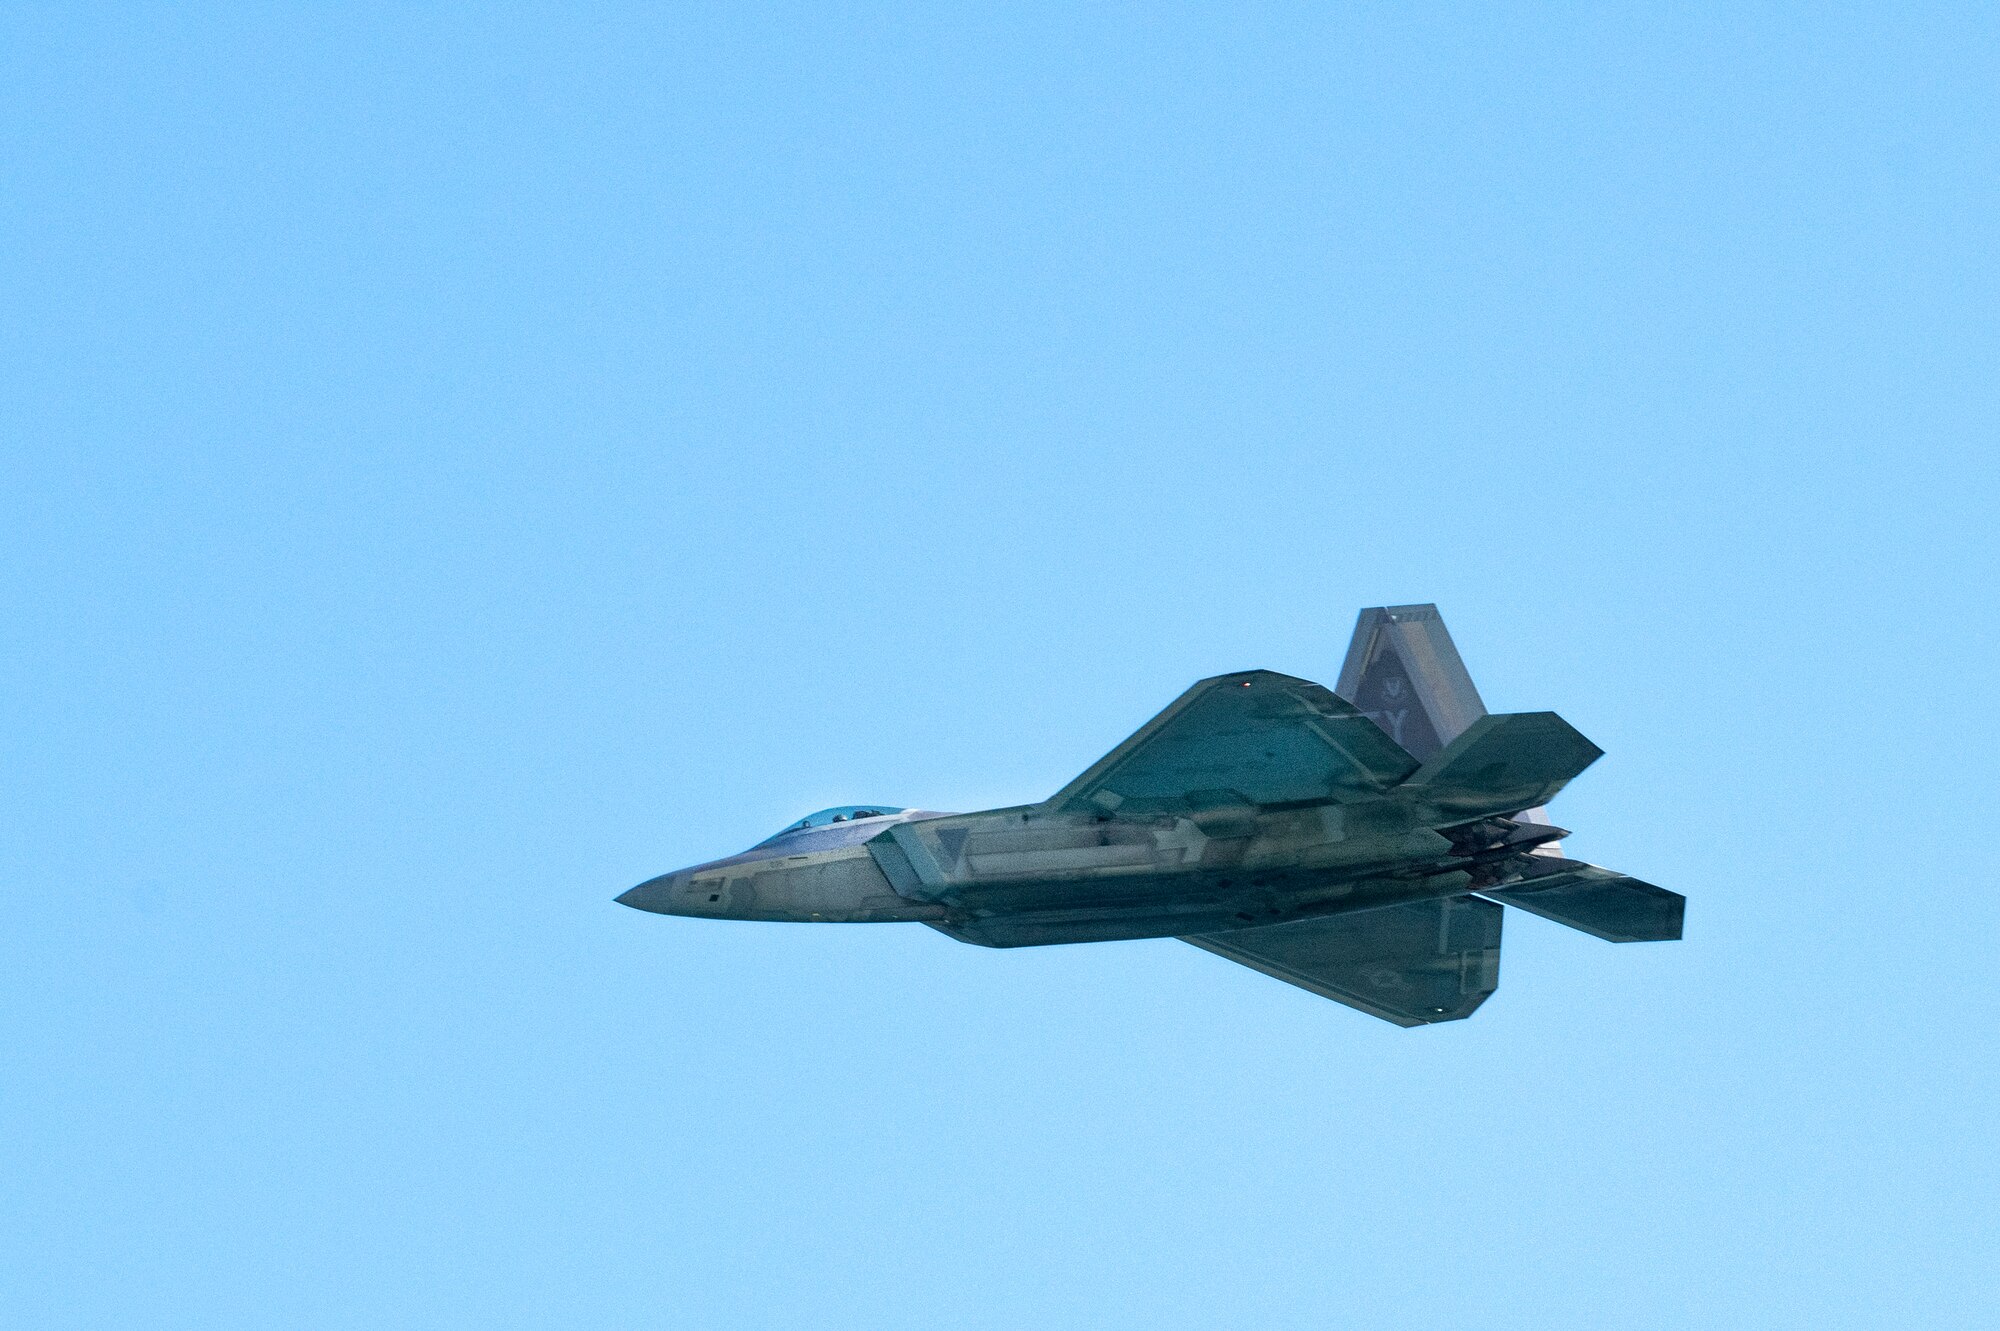 An F-22 Raptor assigned to 43d Fighter Squadron, Tyndall AFB, Fla., flies over during The Doolittle Raiders’ 80th Anniversary ceremony, April 18, 2022 at Okaloosa Island. U.S. Air Force Lt. Gen. Jim Slife, commander of Air Force Special Operations Command and U.S. Air Force Lt. Gen. Brad Webb, commander of Air Education and Training Command (AETC), conducted an aerial review in honor of the members of the Doolittle Raiders.